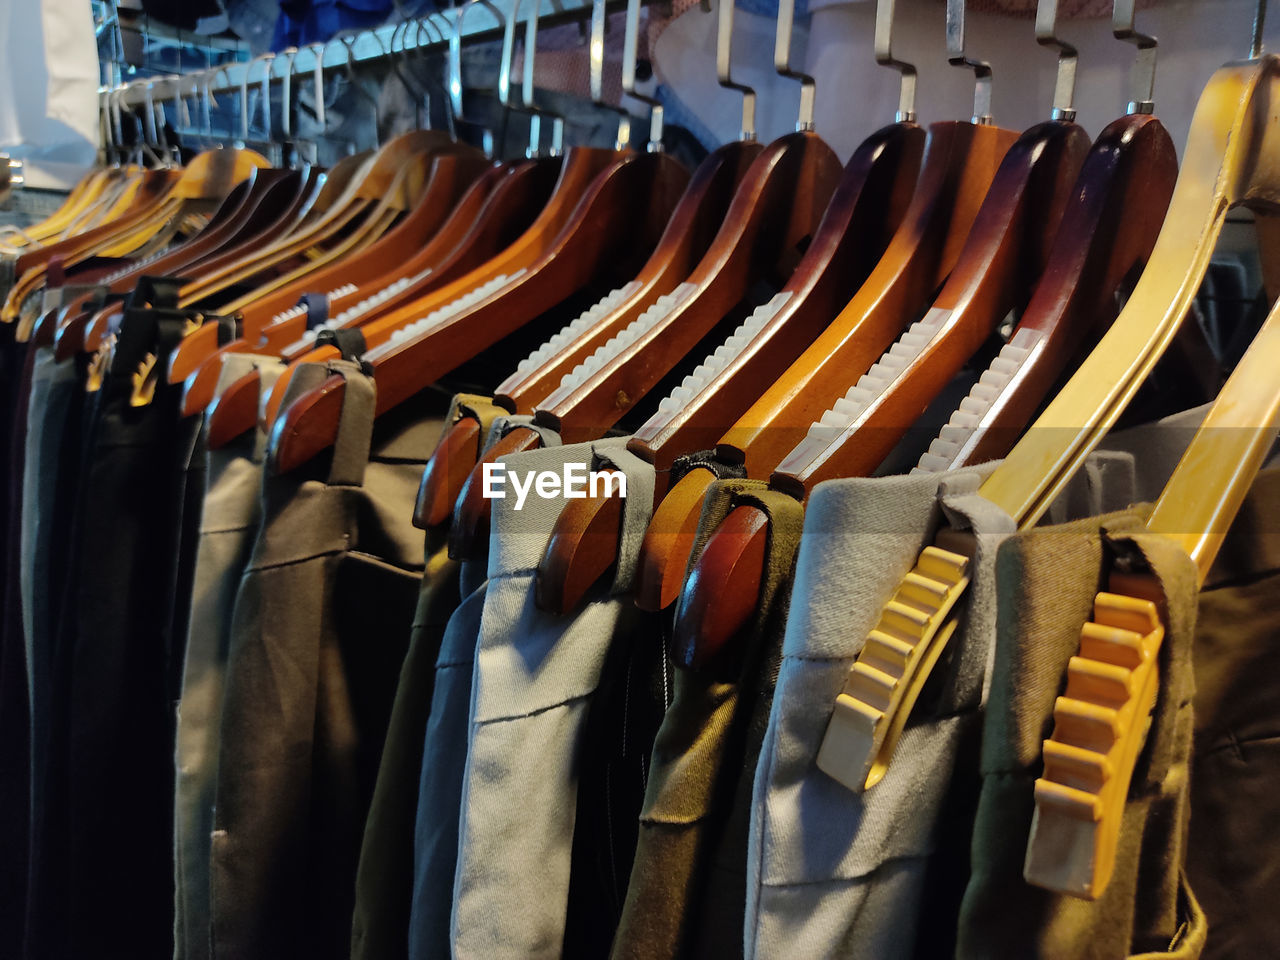 PANORAMIC VIEW OF CLOTHES HANGING ON RACK